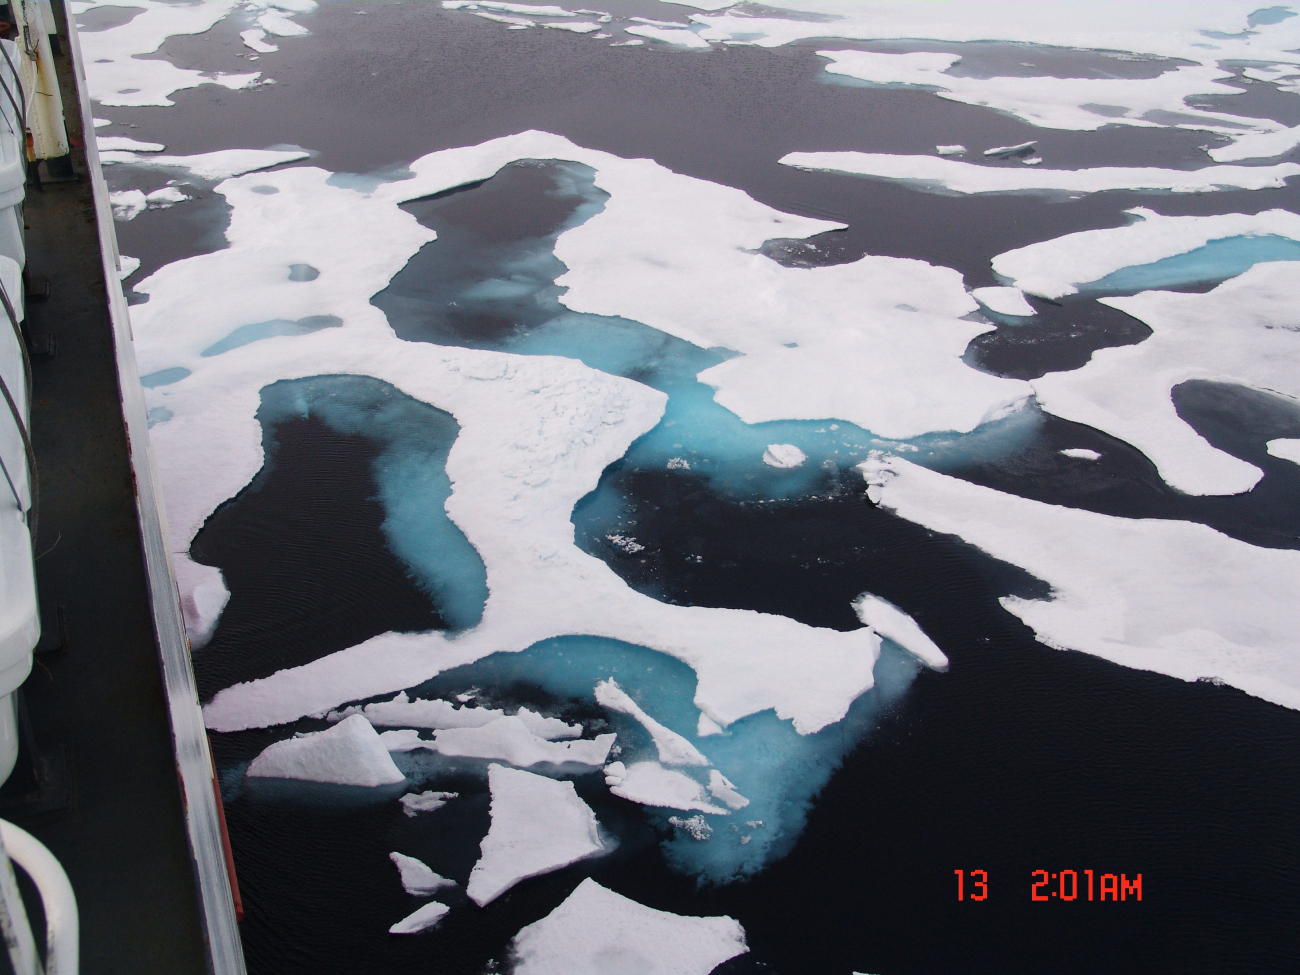 Deteriorating ice floes with melt pools, blue-green ice, and deep dark water inlate summer